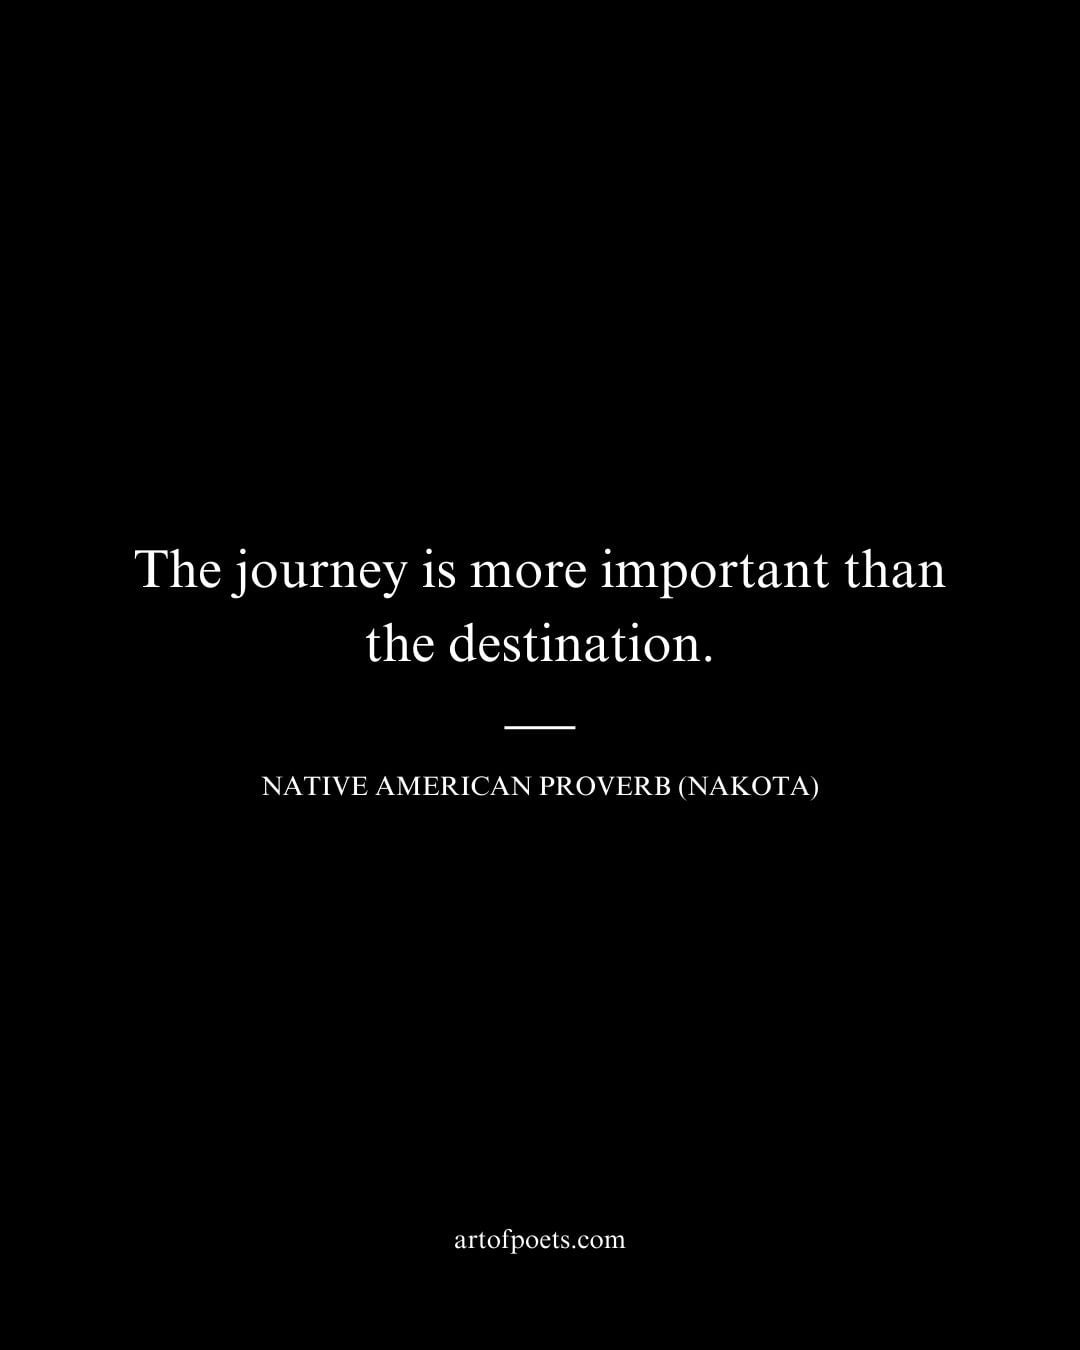 The journey is more important than the destination